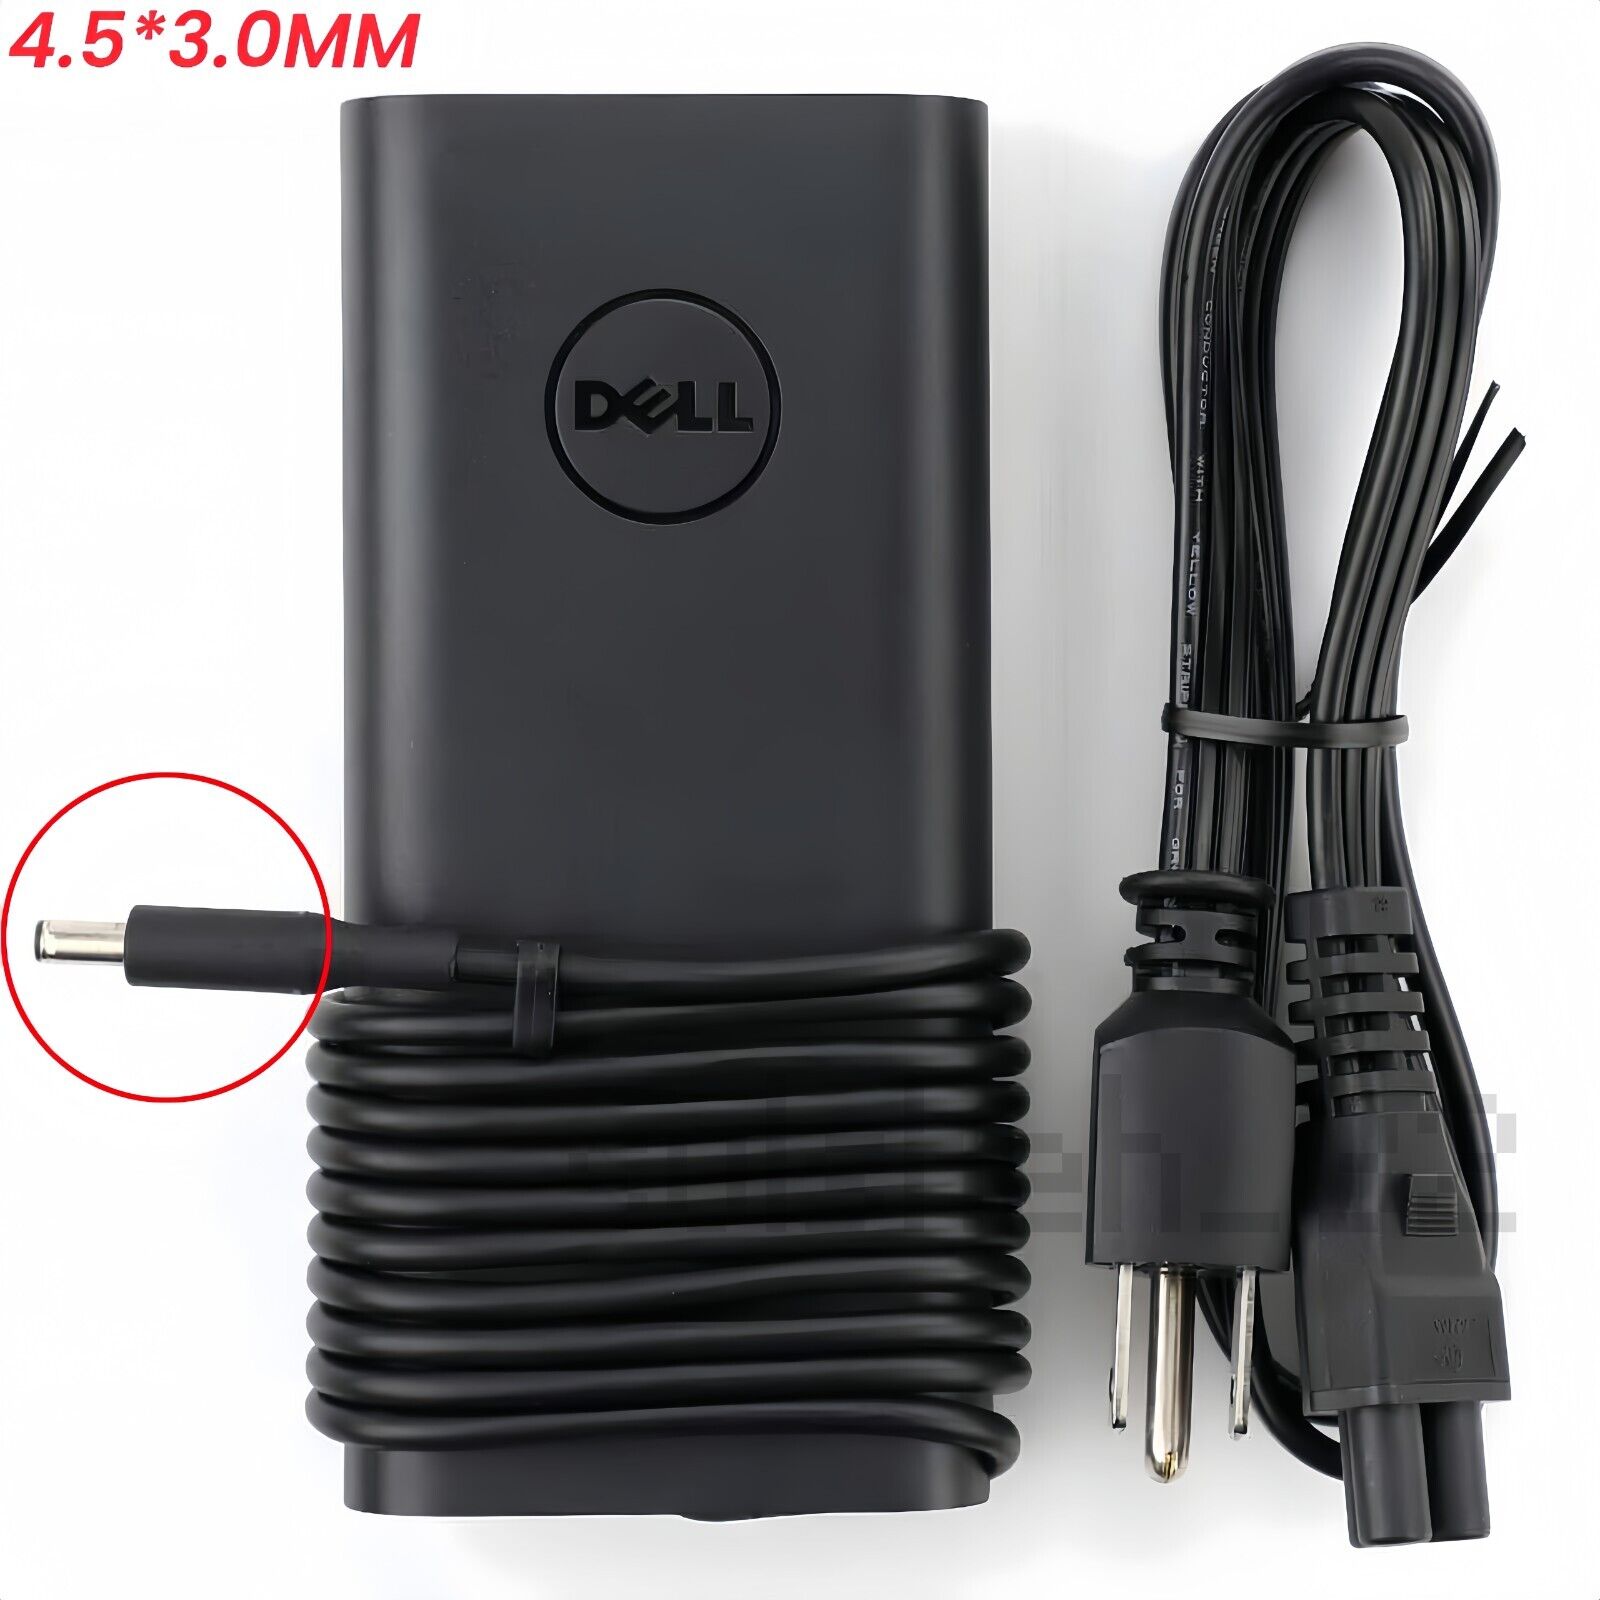 OEM Dell 130W HA130PM130 DA130PM130 Laptop Power Adapter Charger 4.5mm 6TTY6 XPS